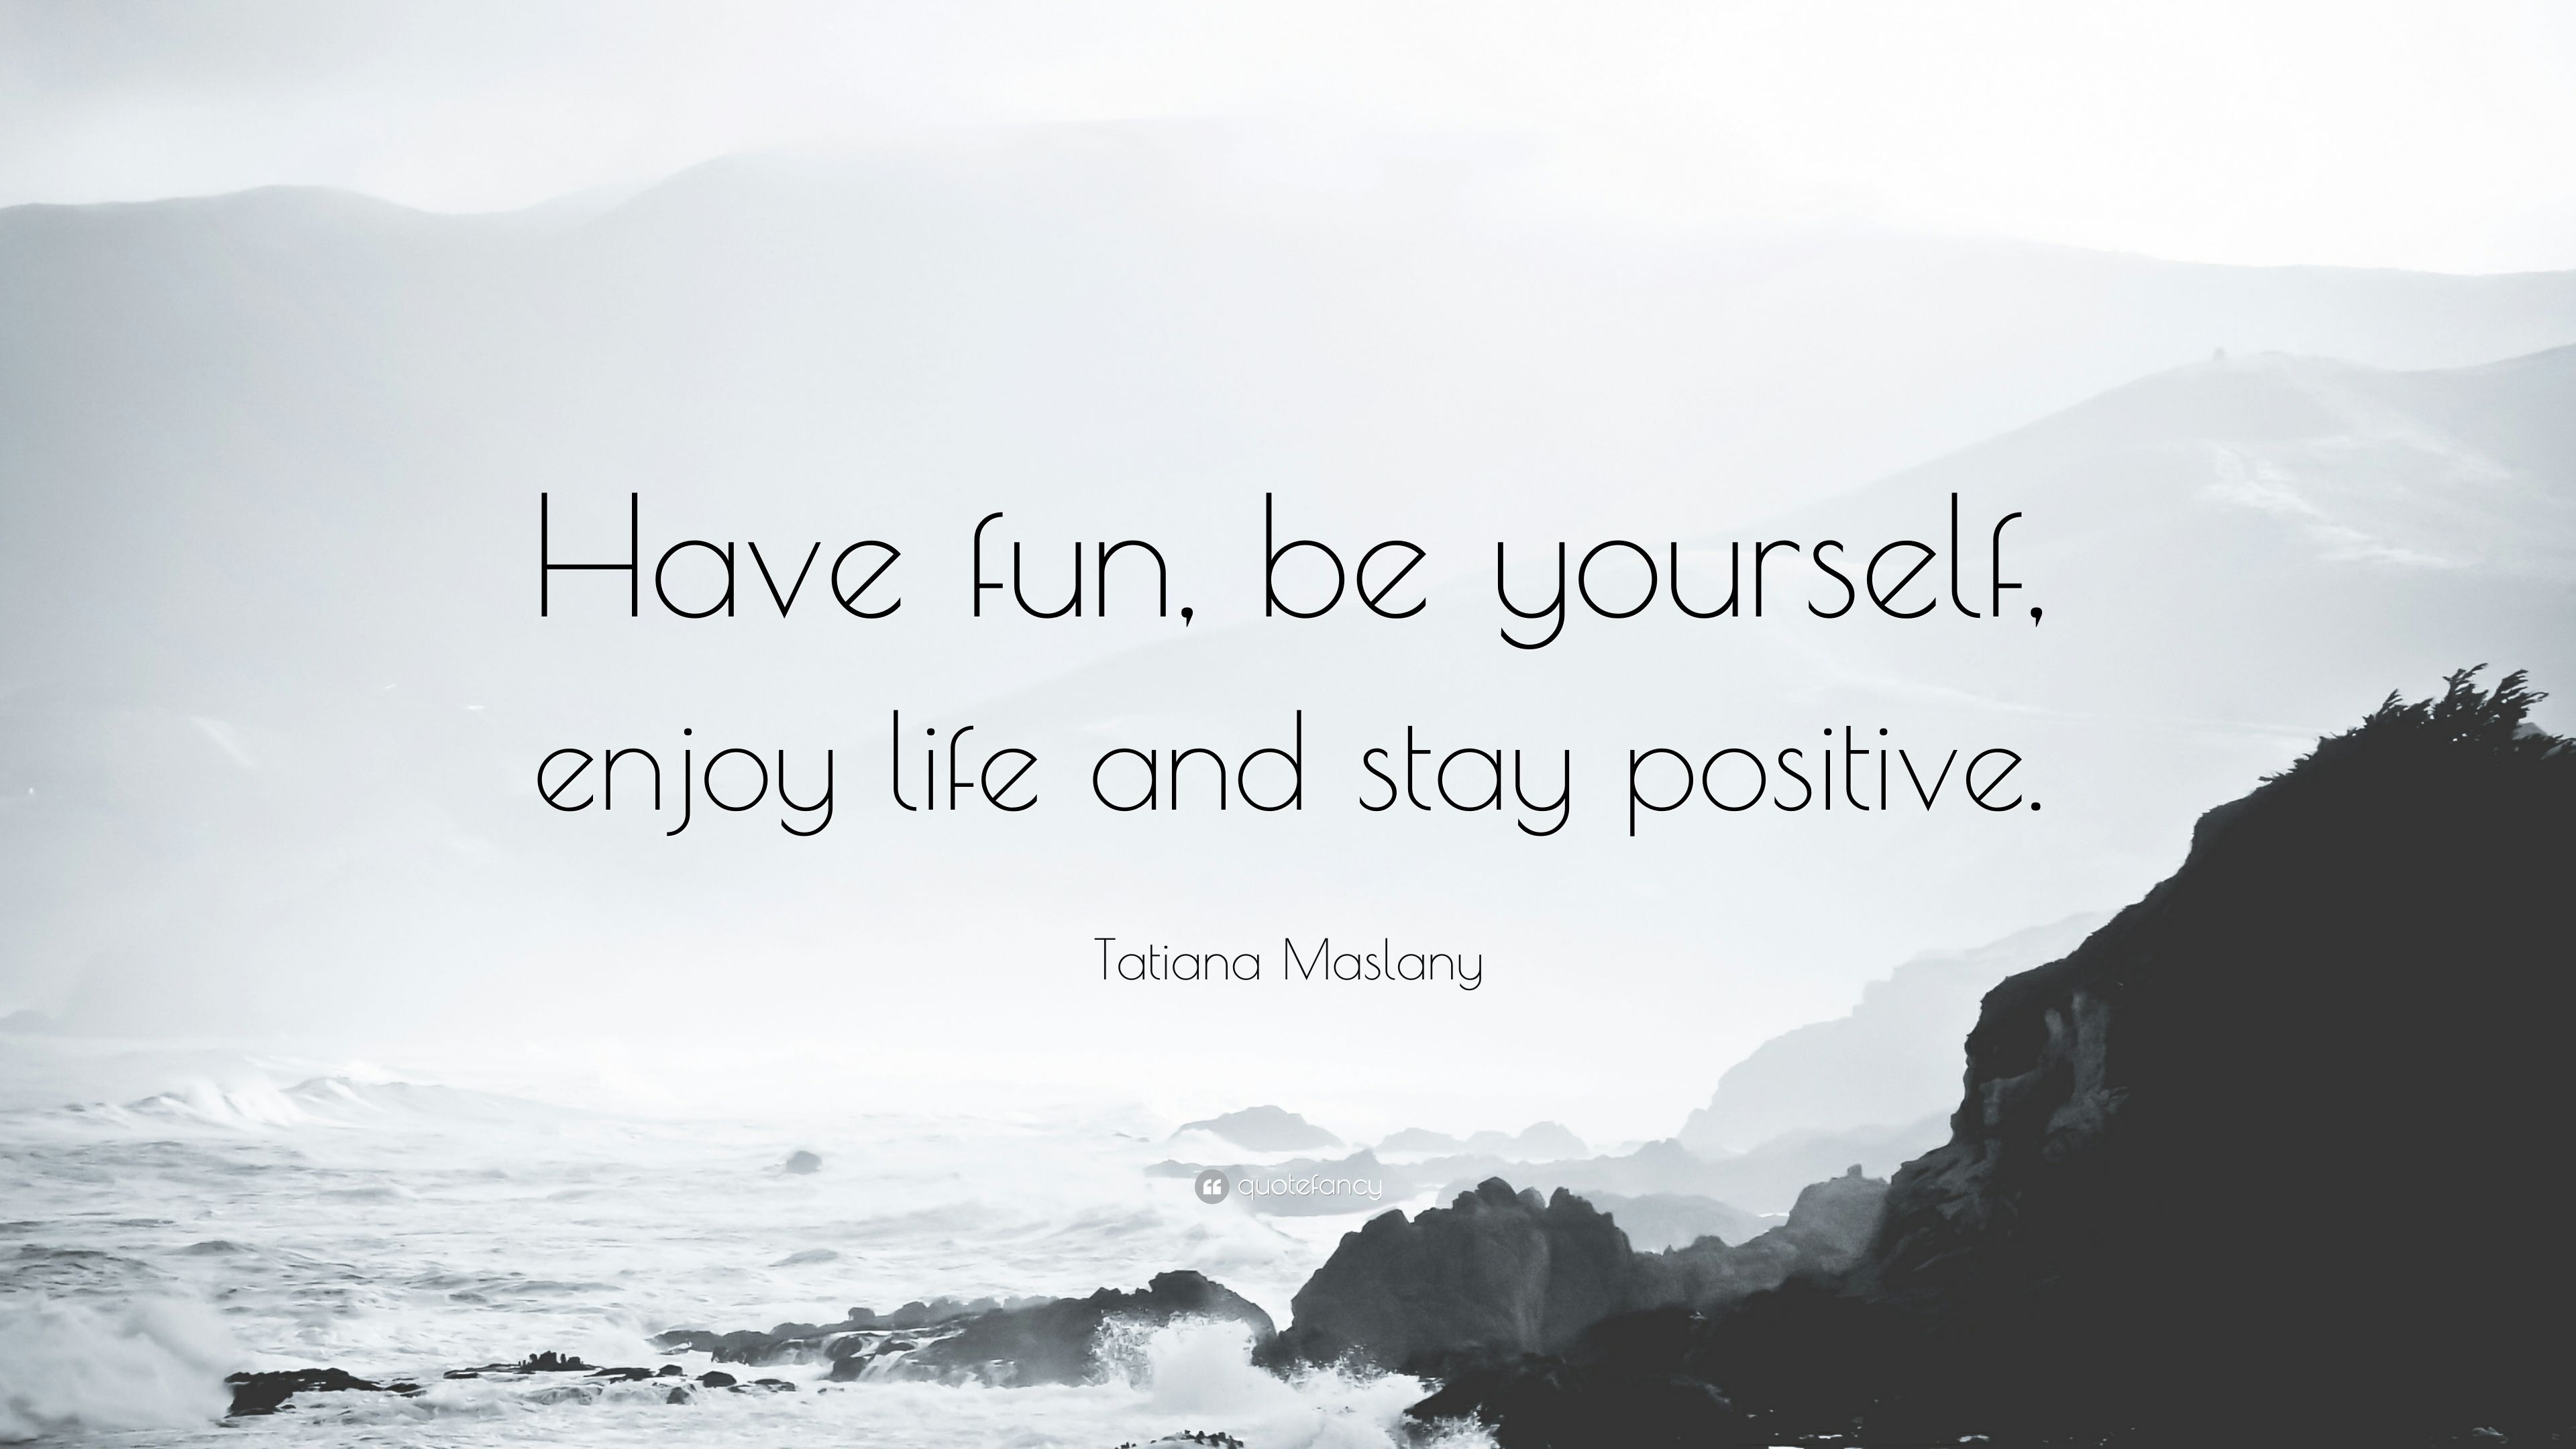 Tatiana Maslany Quote: “Have fun, be yourself, enjoy life and stay positive.” (12 wallpaper)